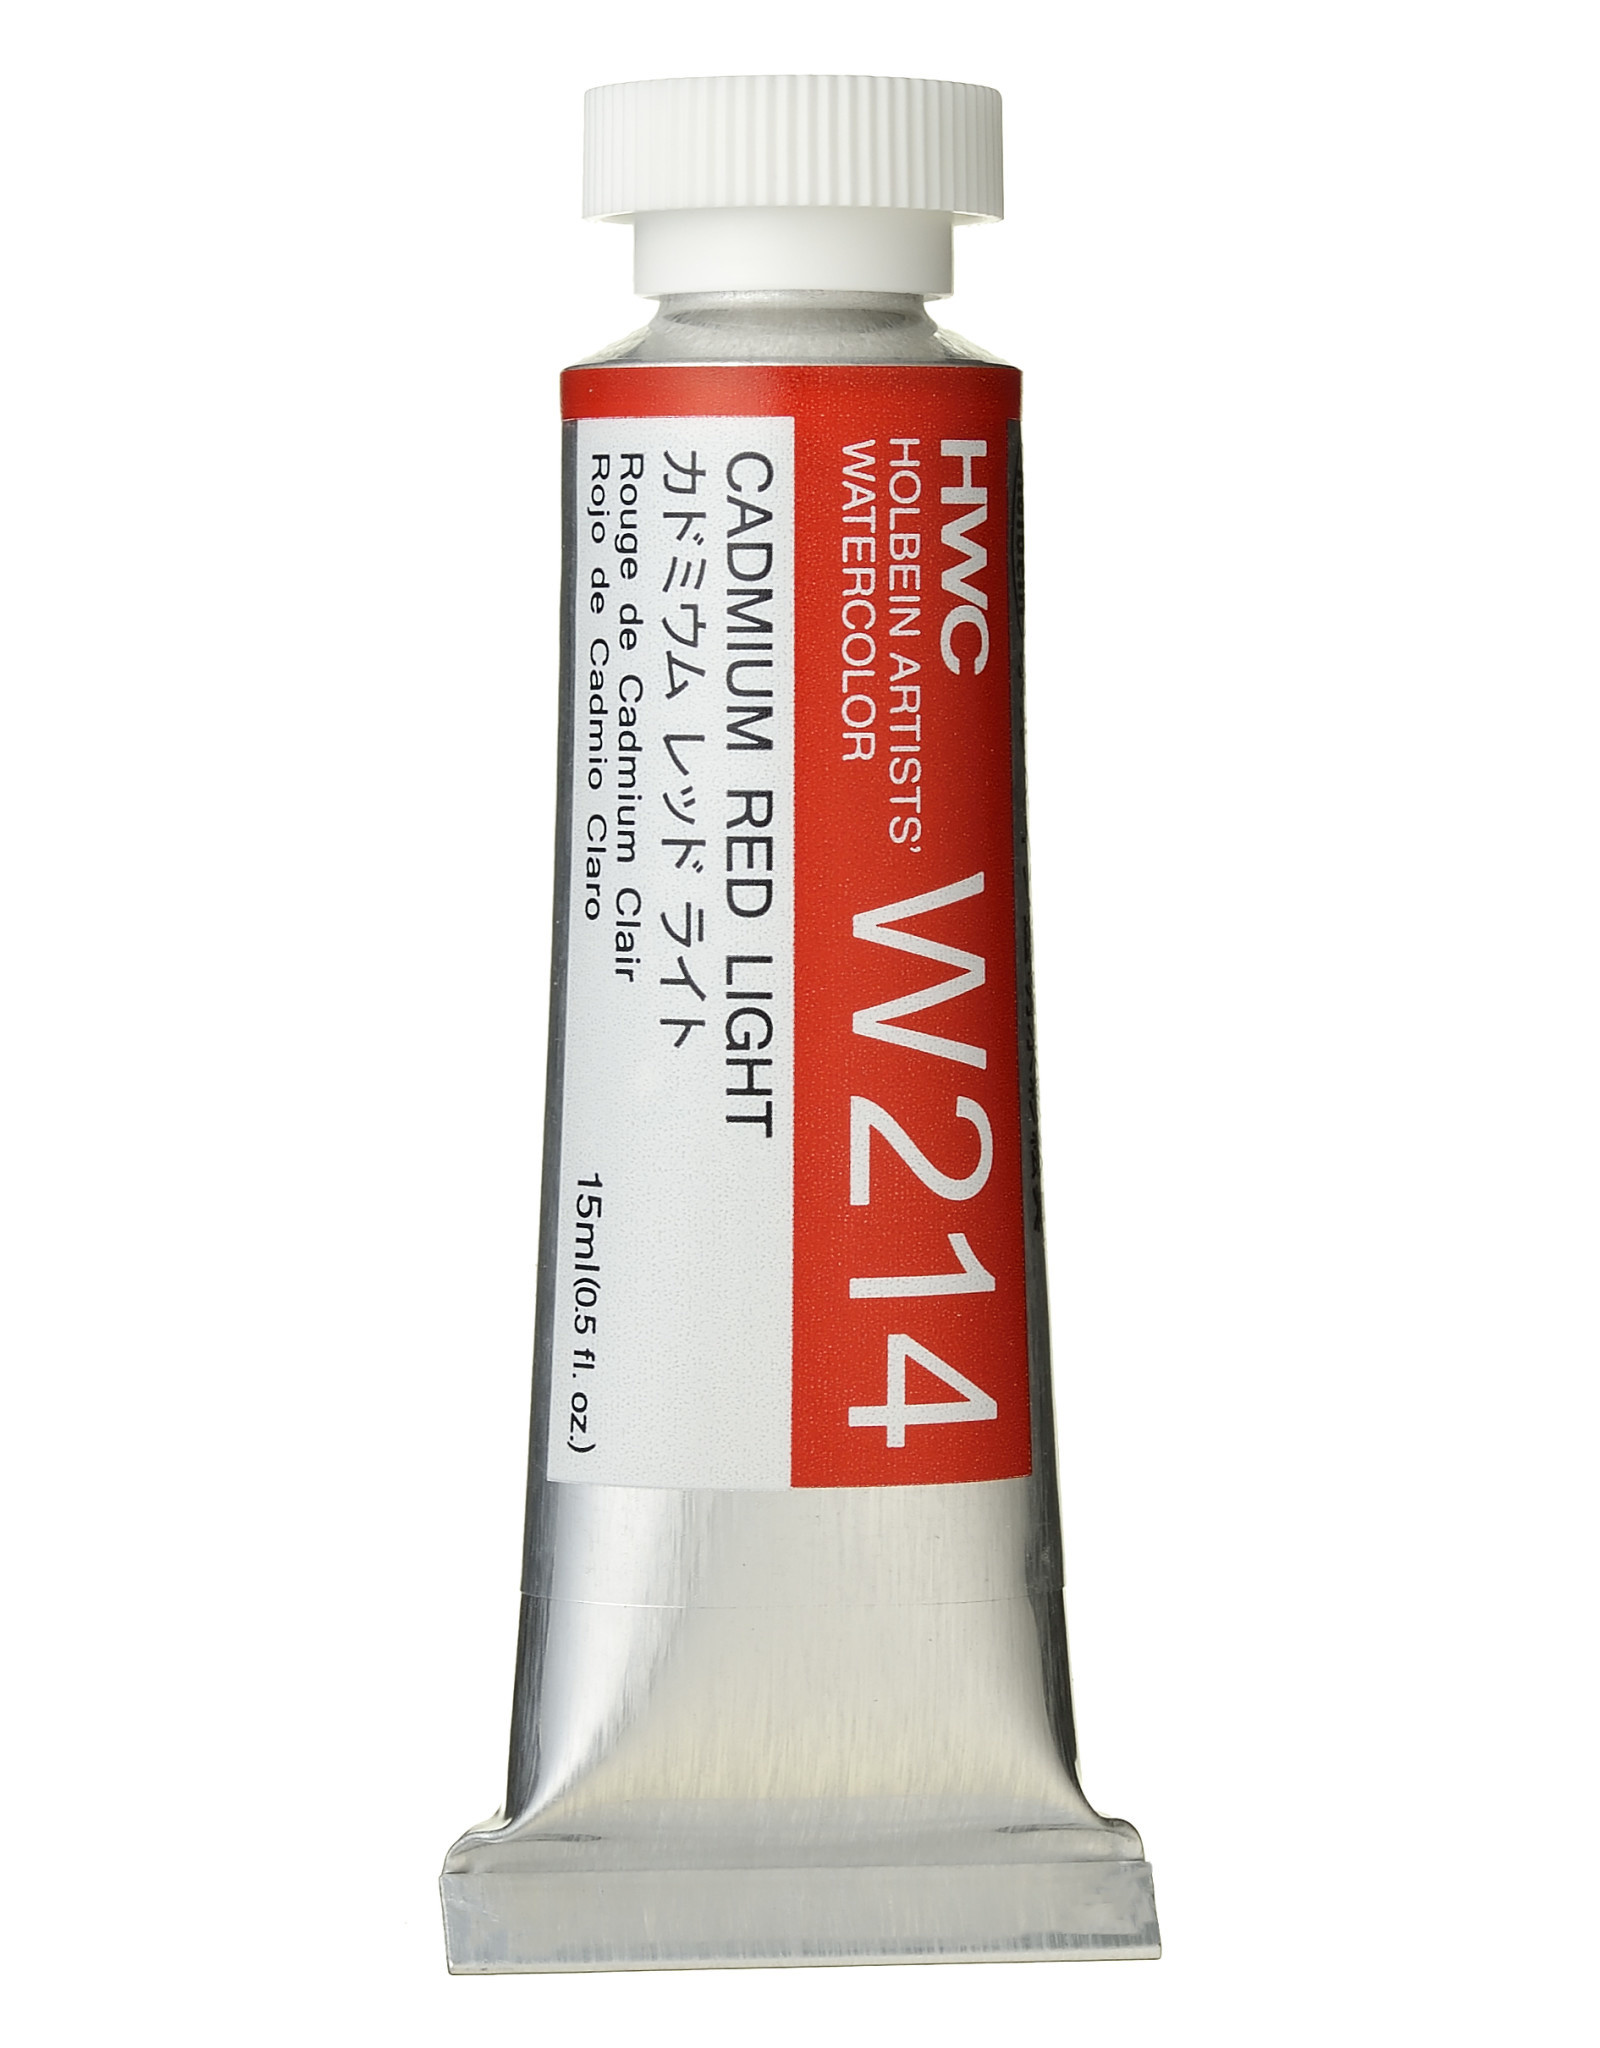 HOLBEIN Holbein Artist’s Watercolor, Cadmium Red Light 15ml